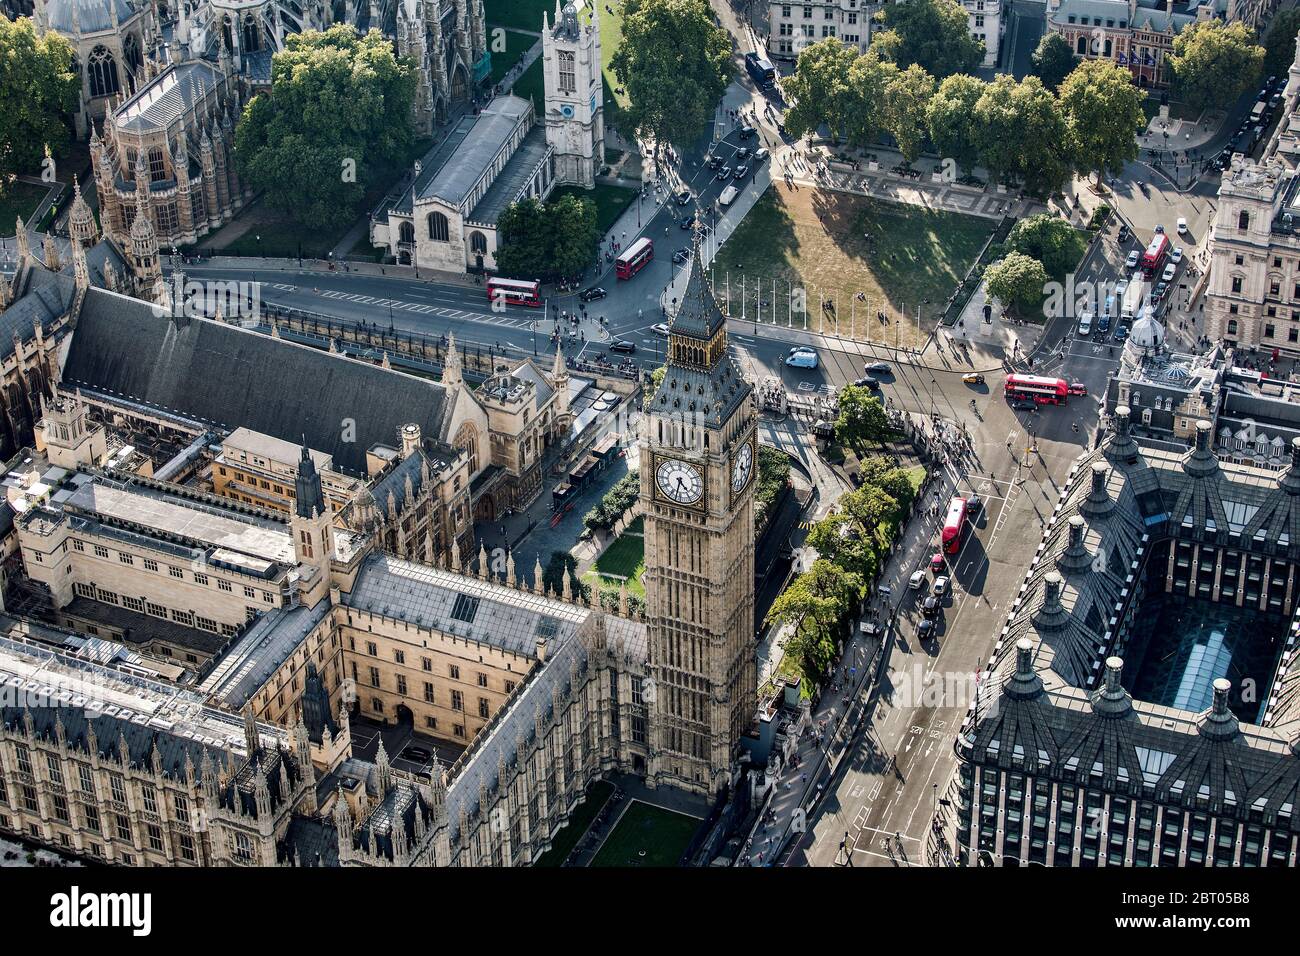 Aerial view of Big Ben and Parliament Square in London, the Houses of Parliament. Stock Photo